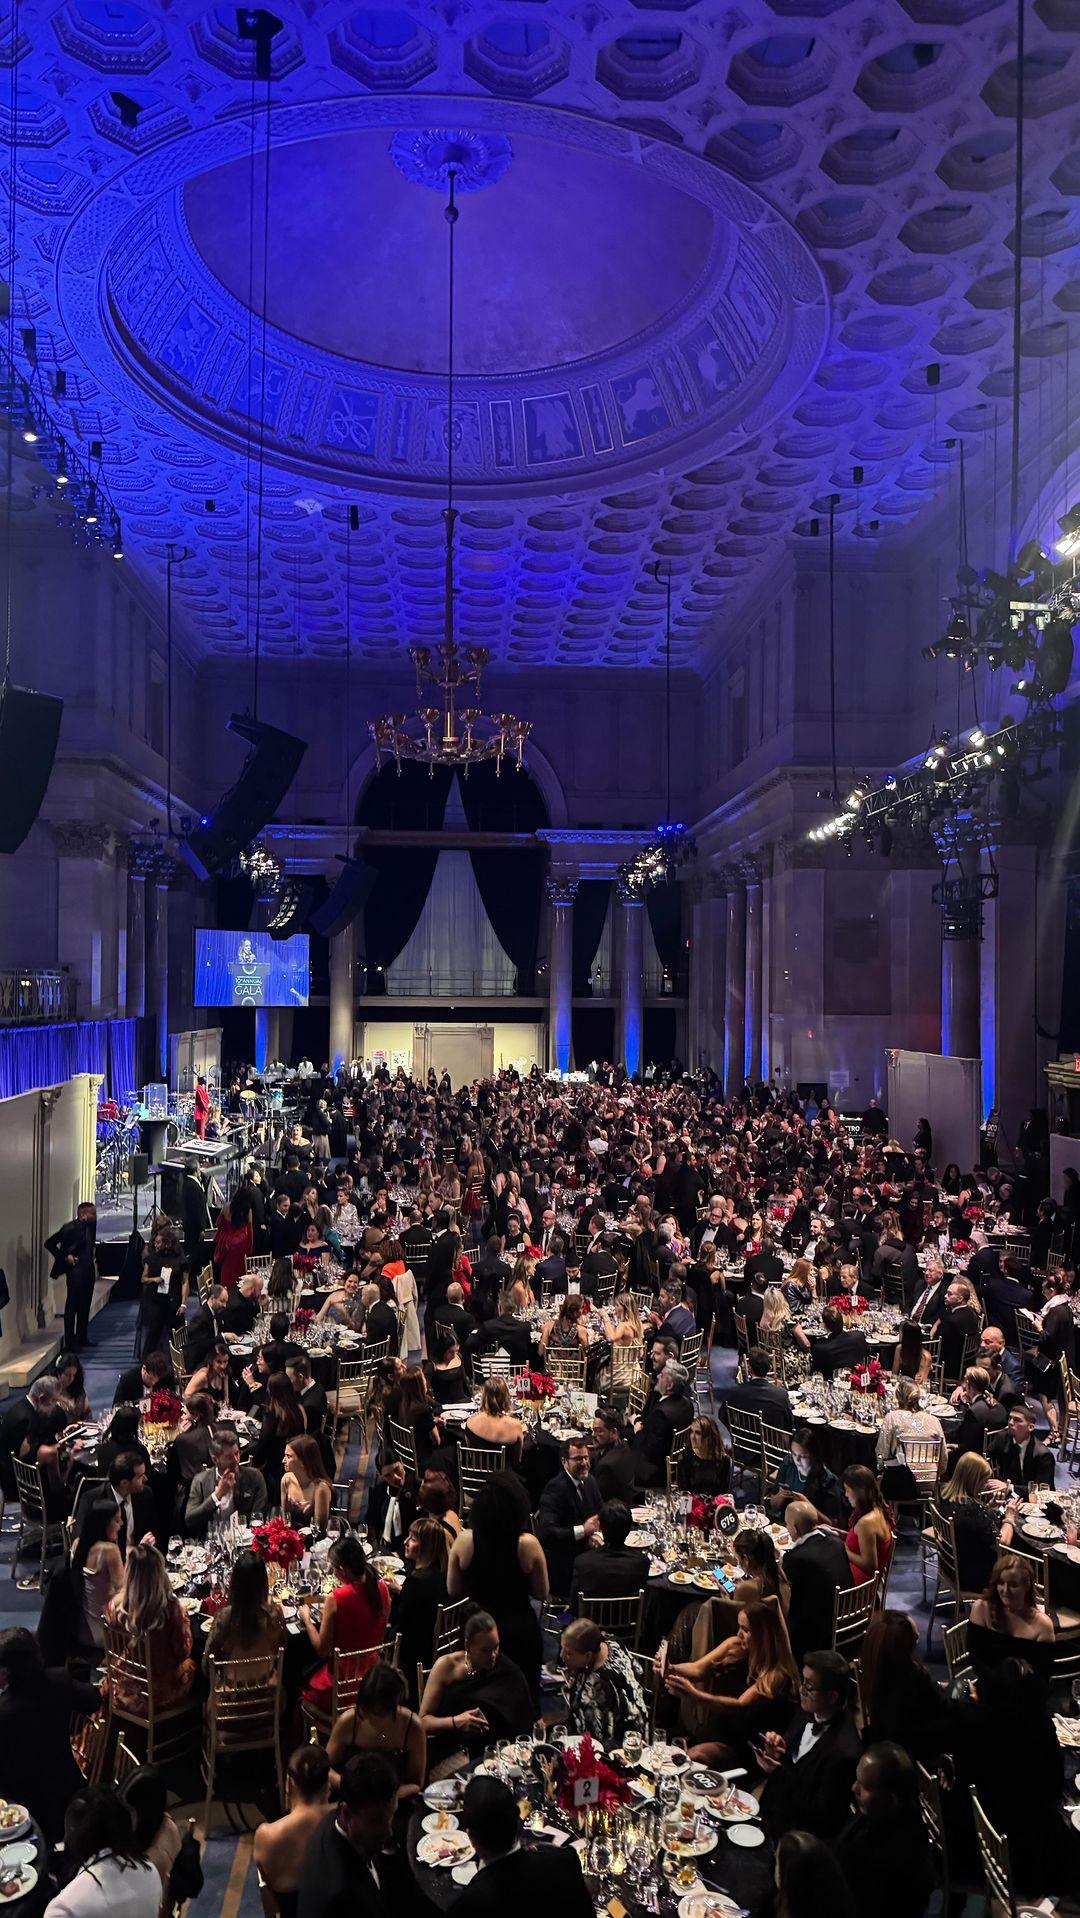 class="content__text"#BTS of the 10th Annual Changing Lives, Building Dreams Gala! Our incredible night would not be possible without the help and support of our staff and volunteers. Thank you to all of you ❤️

#MCFGala23 #changinglivesbuildingdreams